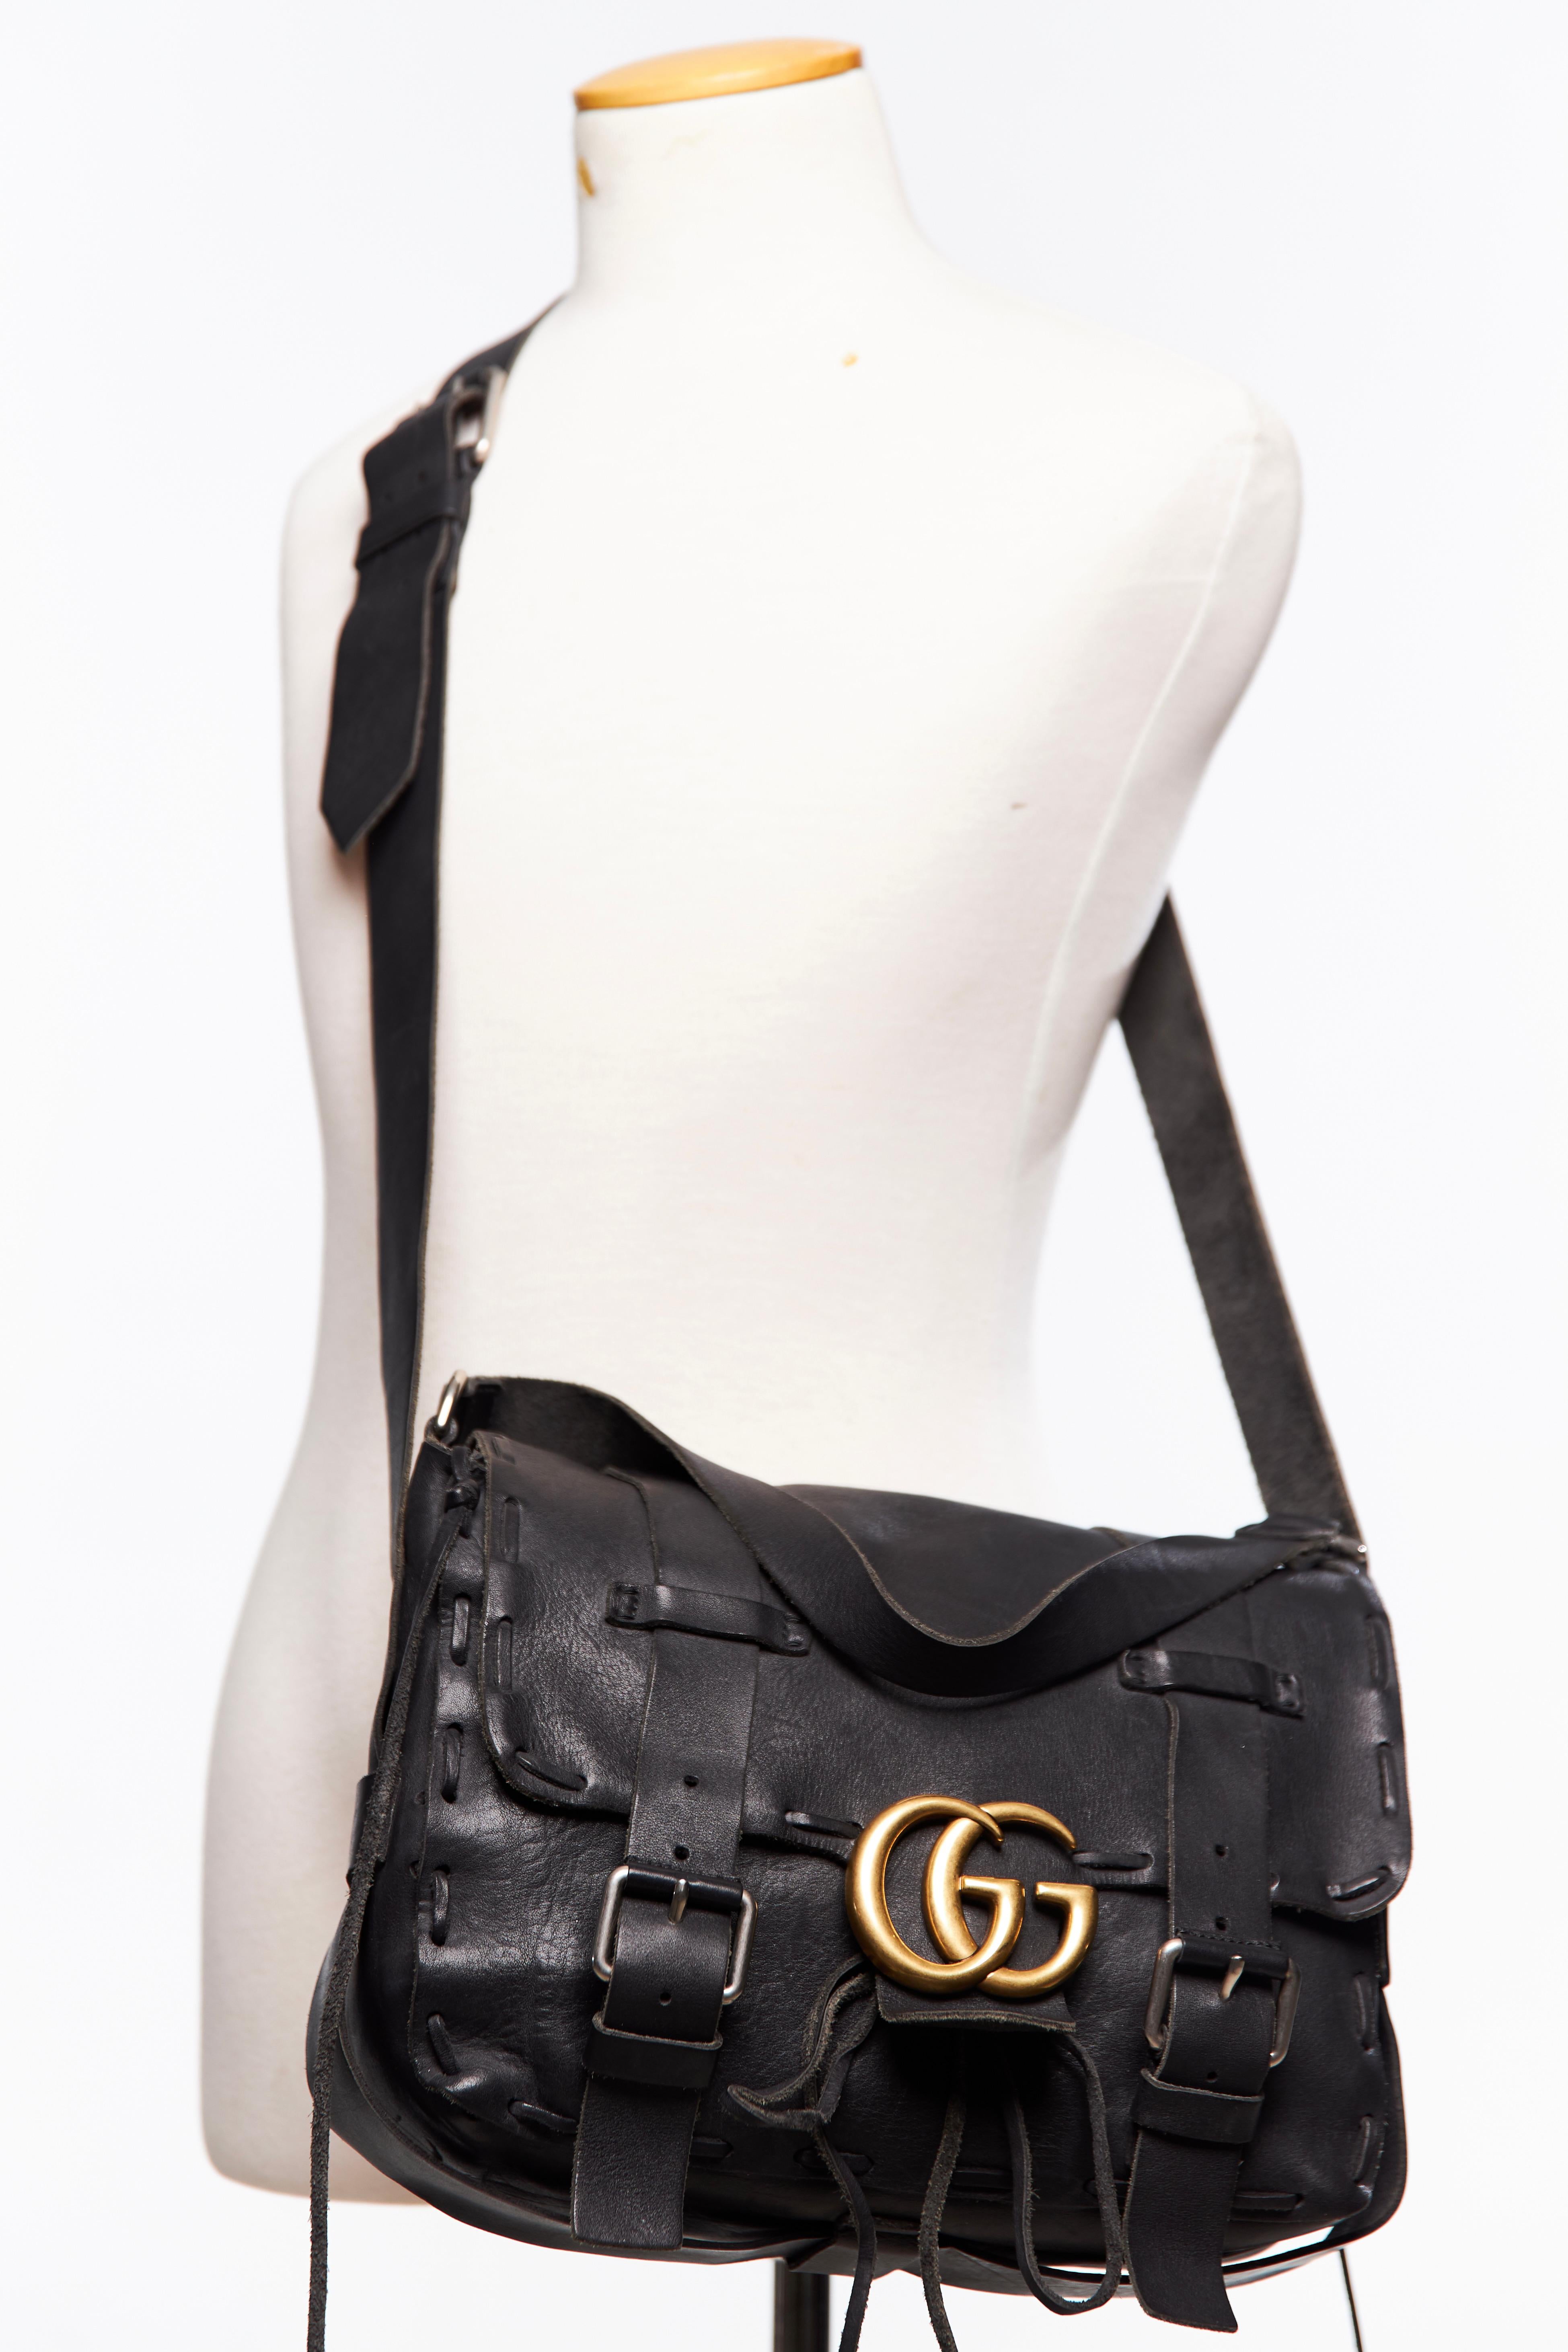 This Gucci messenger bag is made with aged leather in black and features laced edging, an aged gold tone GG, silver hardware, an adjustable shoulder strap, a top handle, black suede interior and a large front flap with buckle and snap